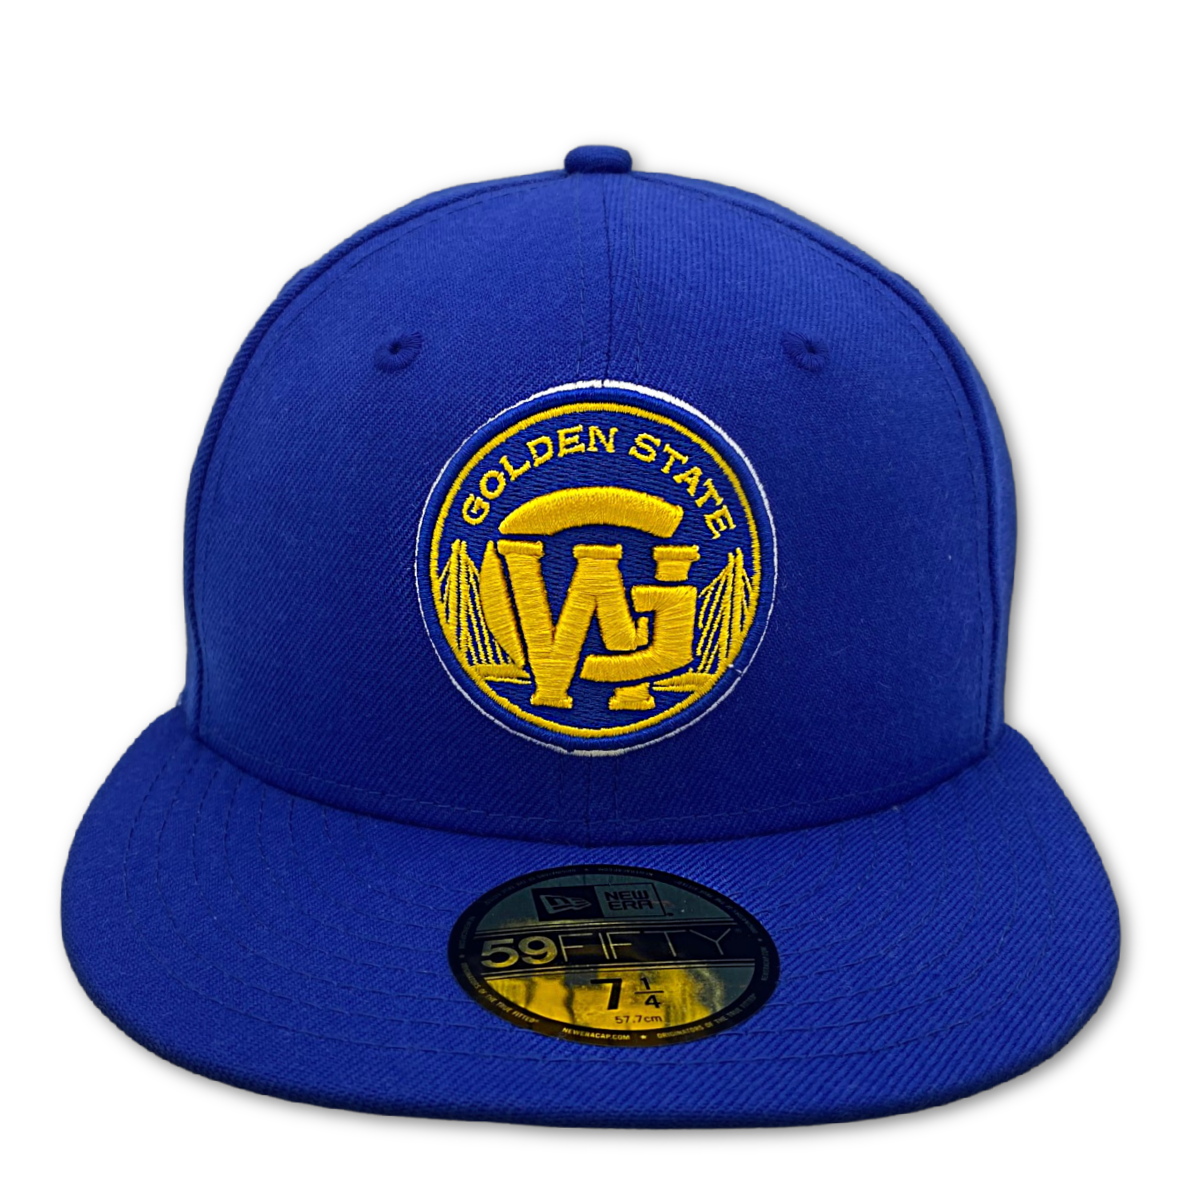 GOLDEN STATE WARRIORS COMBO LOGOS 59FIFTY HAT-ROYAL nvsoccer.com The Coliseum